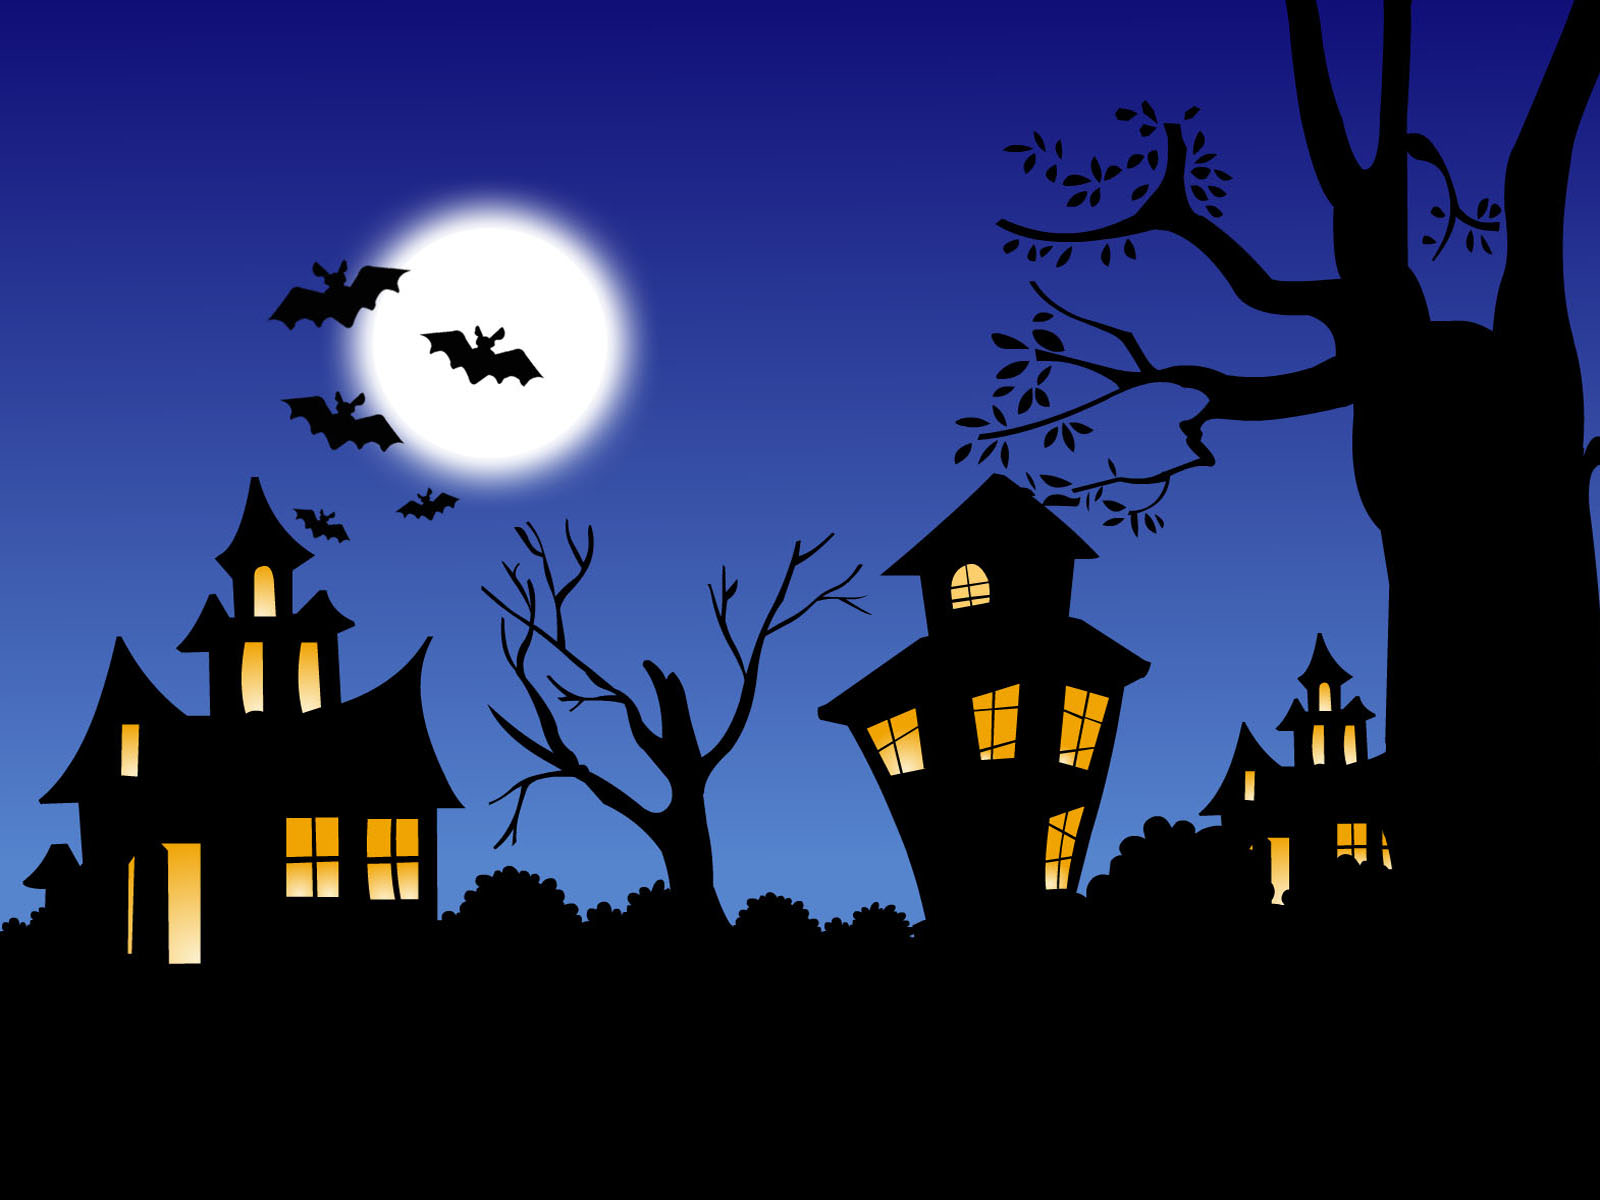 Halloween Wallpaper Hd Images amp Pictures   Becuo